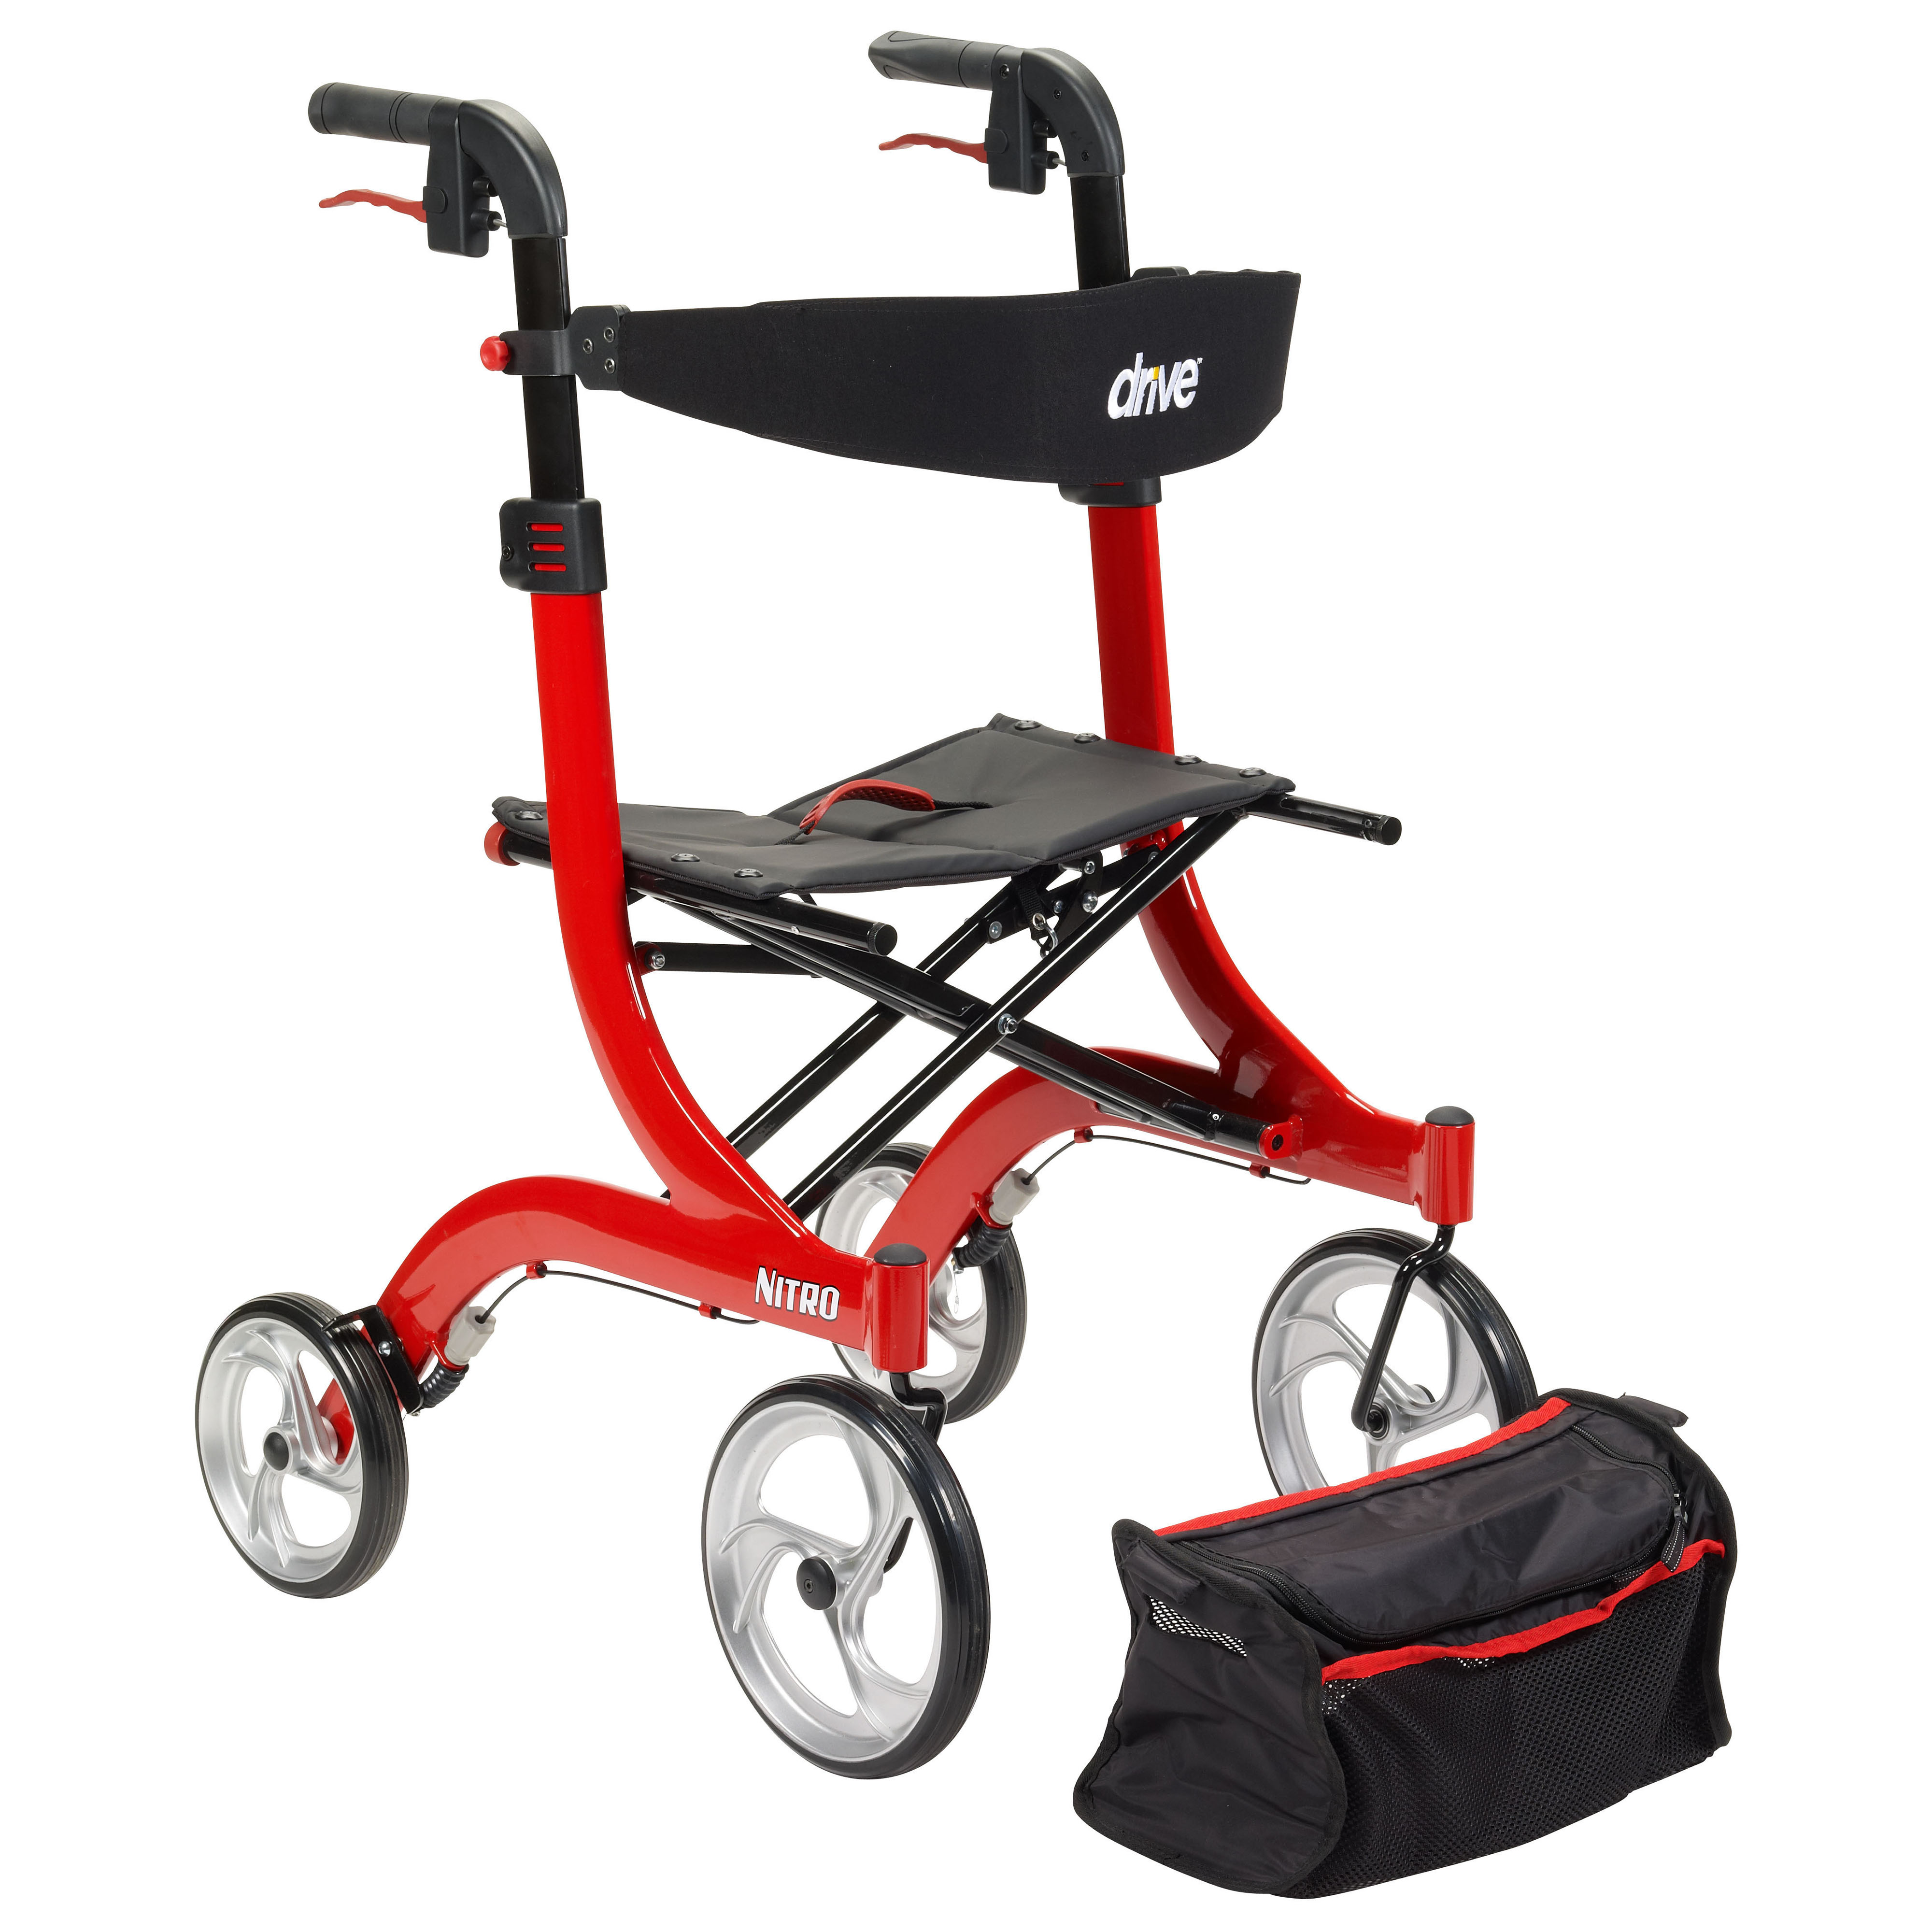 Drive Medical Nitro Euro Style Rollator Rolling Walker, Red - image 4 of 12